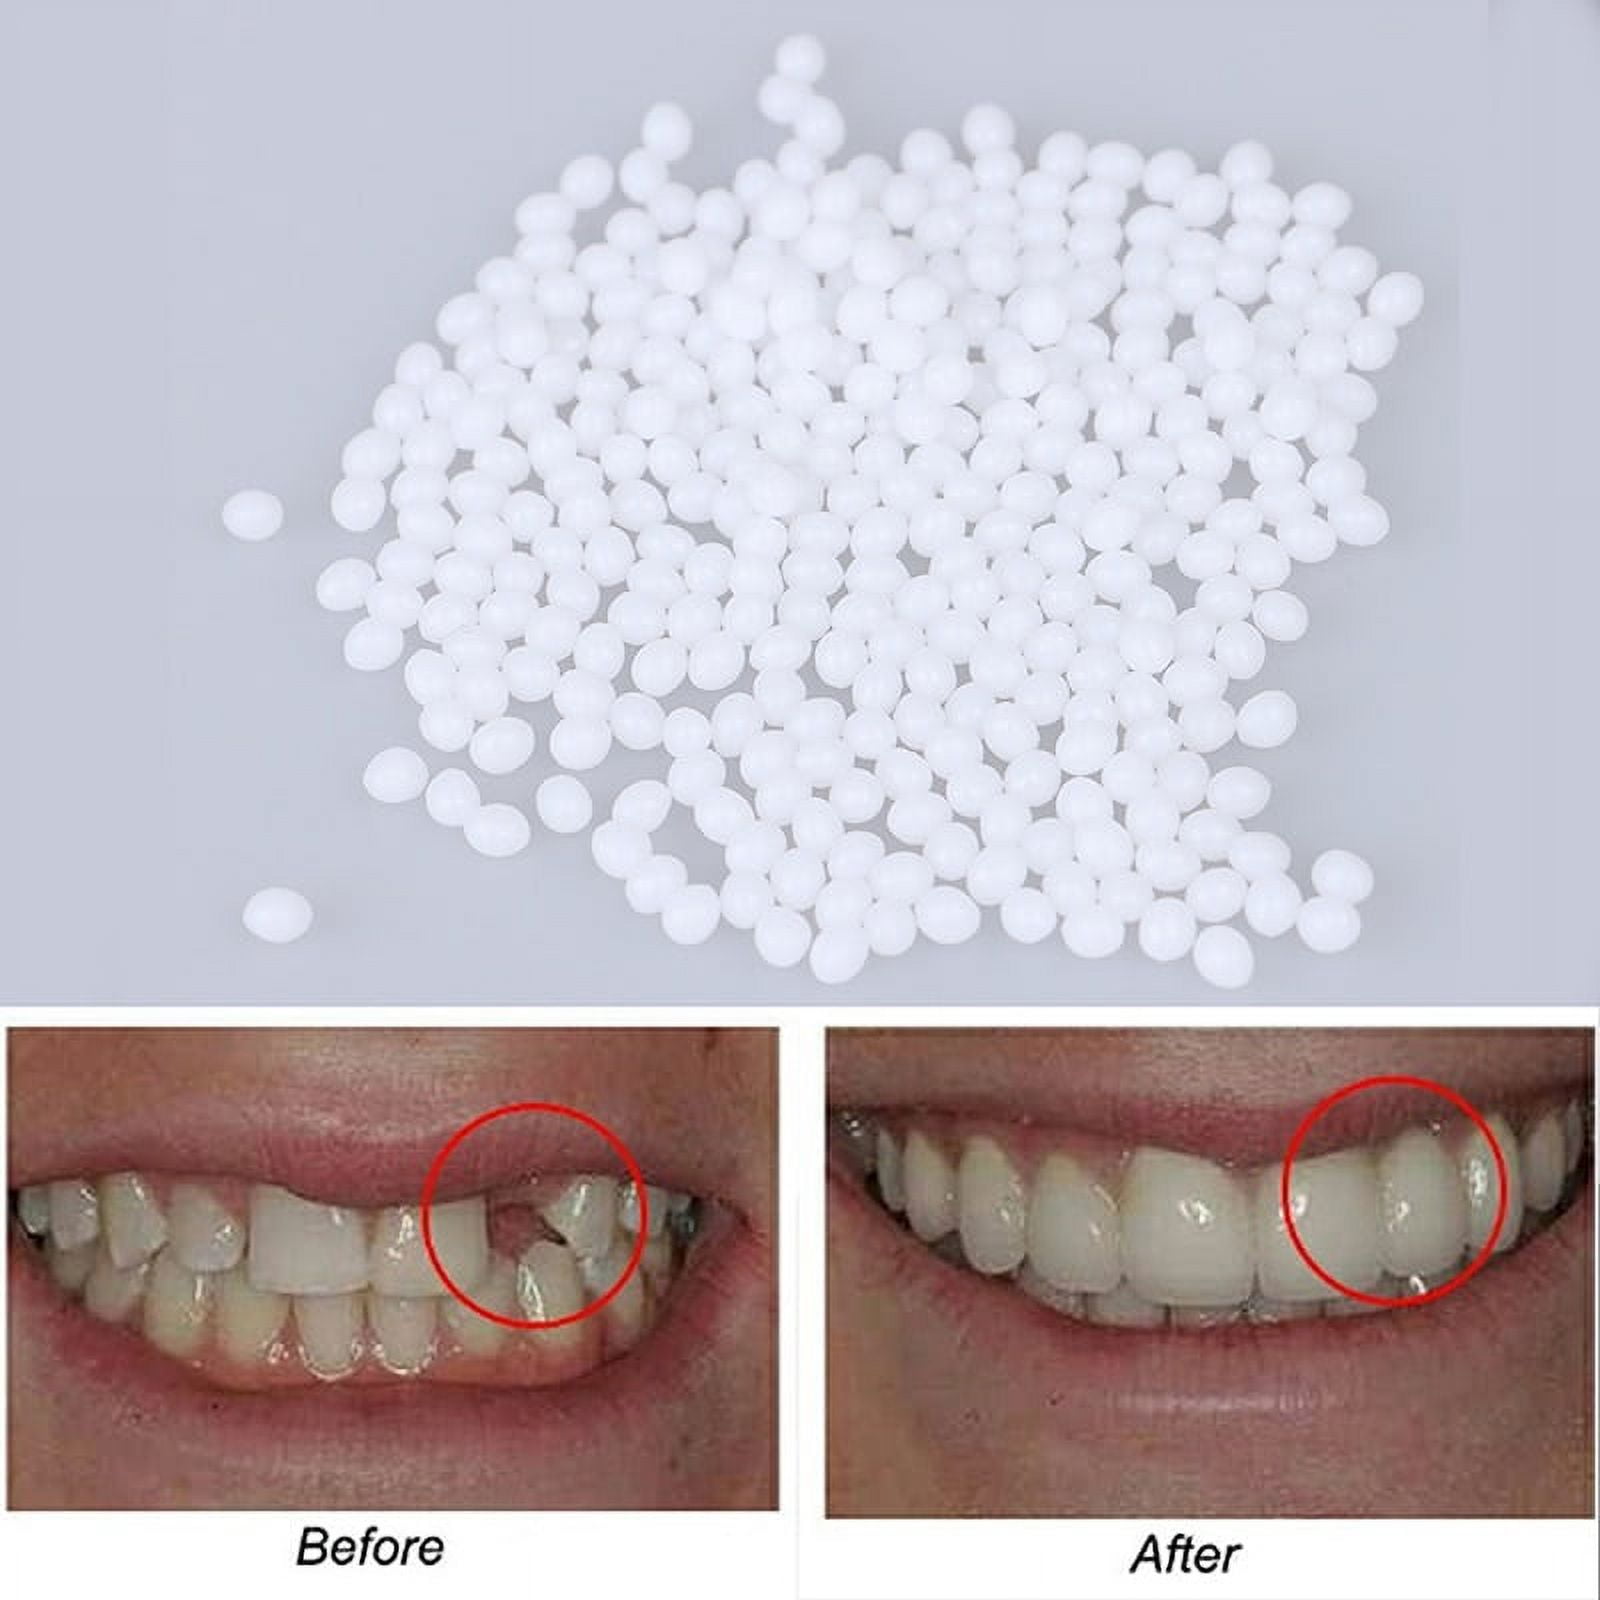  Tooth Repair Kit-Thermal Fitting Beads Granules and Fake Teeth  for Temporary Fixing Missing and Broken Tooth, Moldable Fake Teeth and  Thermal Beads Replacement Kit.【Teeth - White】 : Health & Household